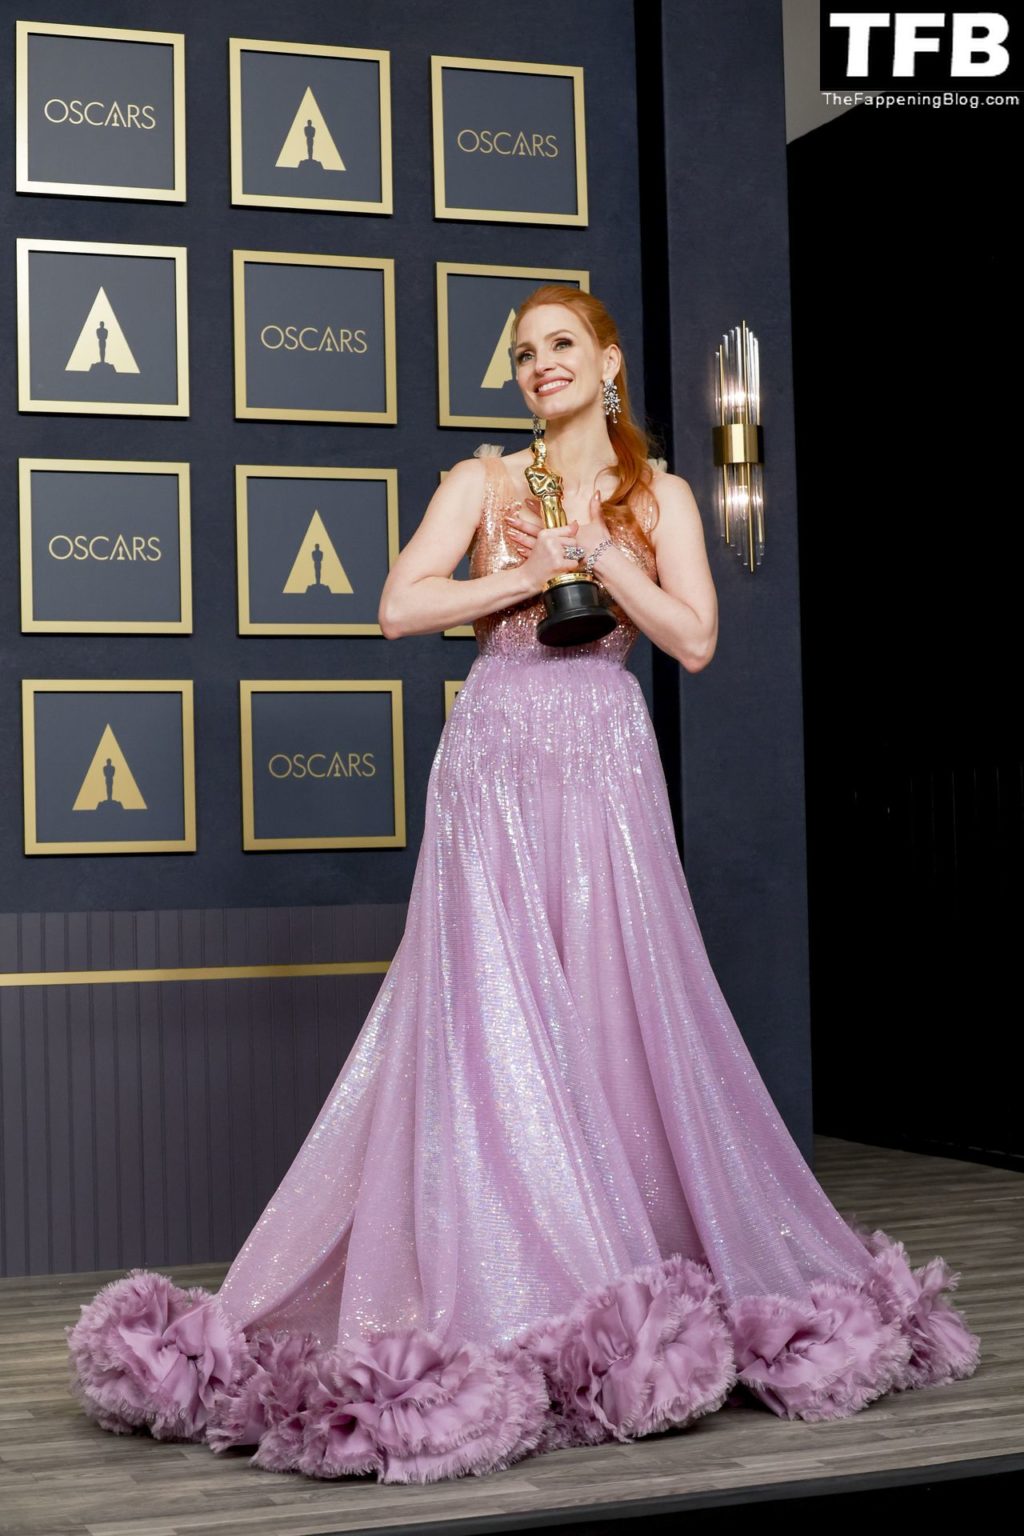 Jessica Chastain Sexy The Fappening Blog 61 1 1024x1536 - Jessica Chastain Poses With Her Oscar at the 94th Academy Awards (150 Photos)